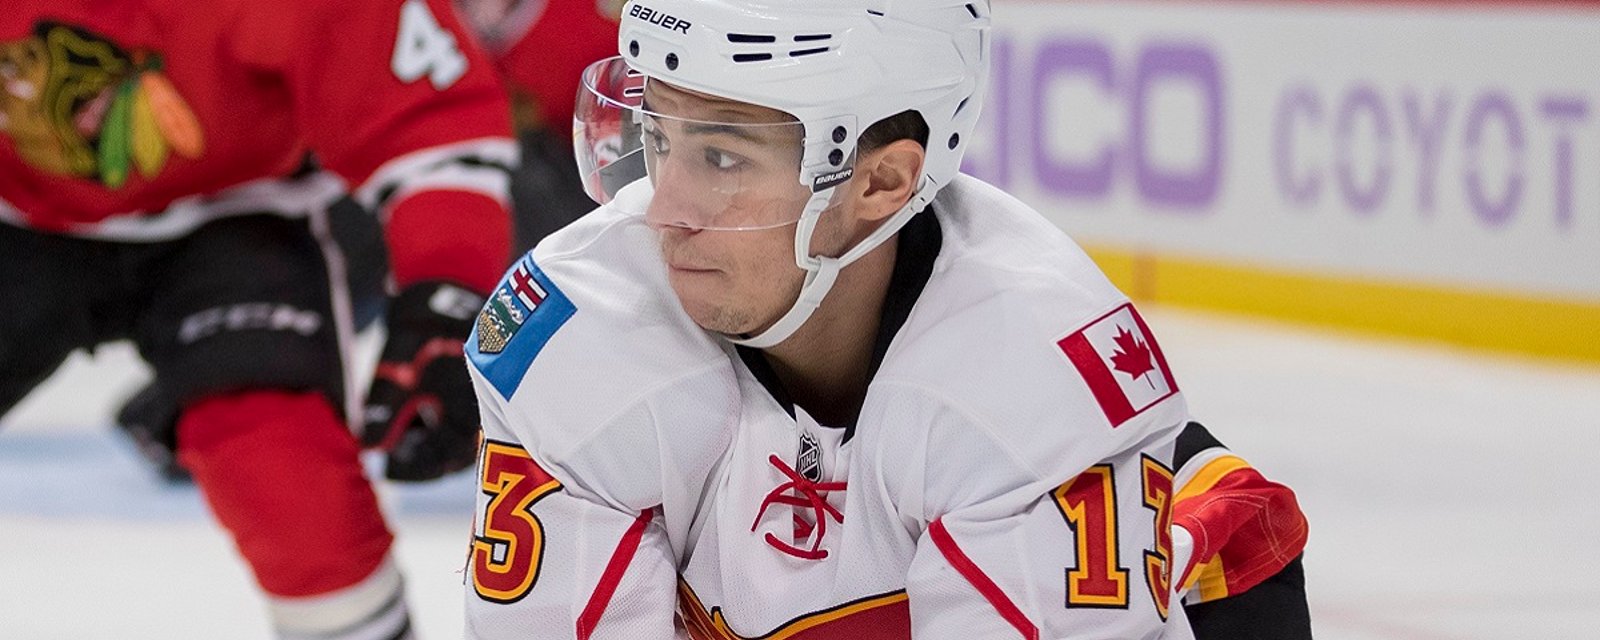 Updated time table for Gaudreau's recovery indicate he will miss considerable time.